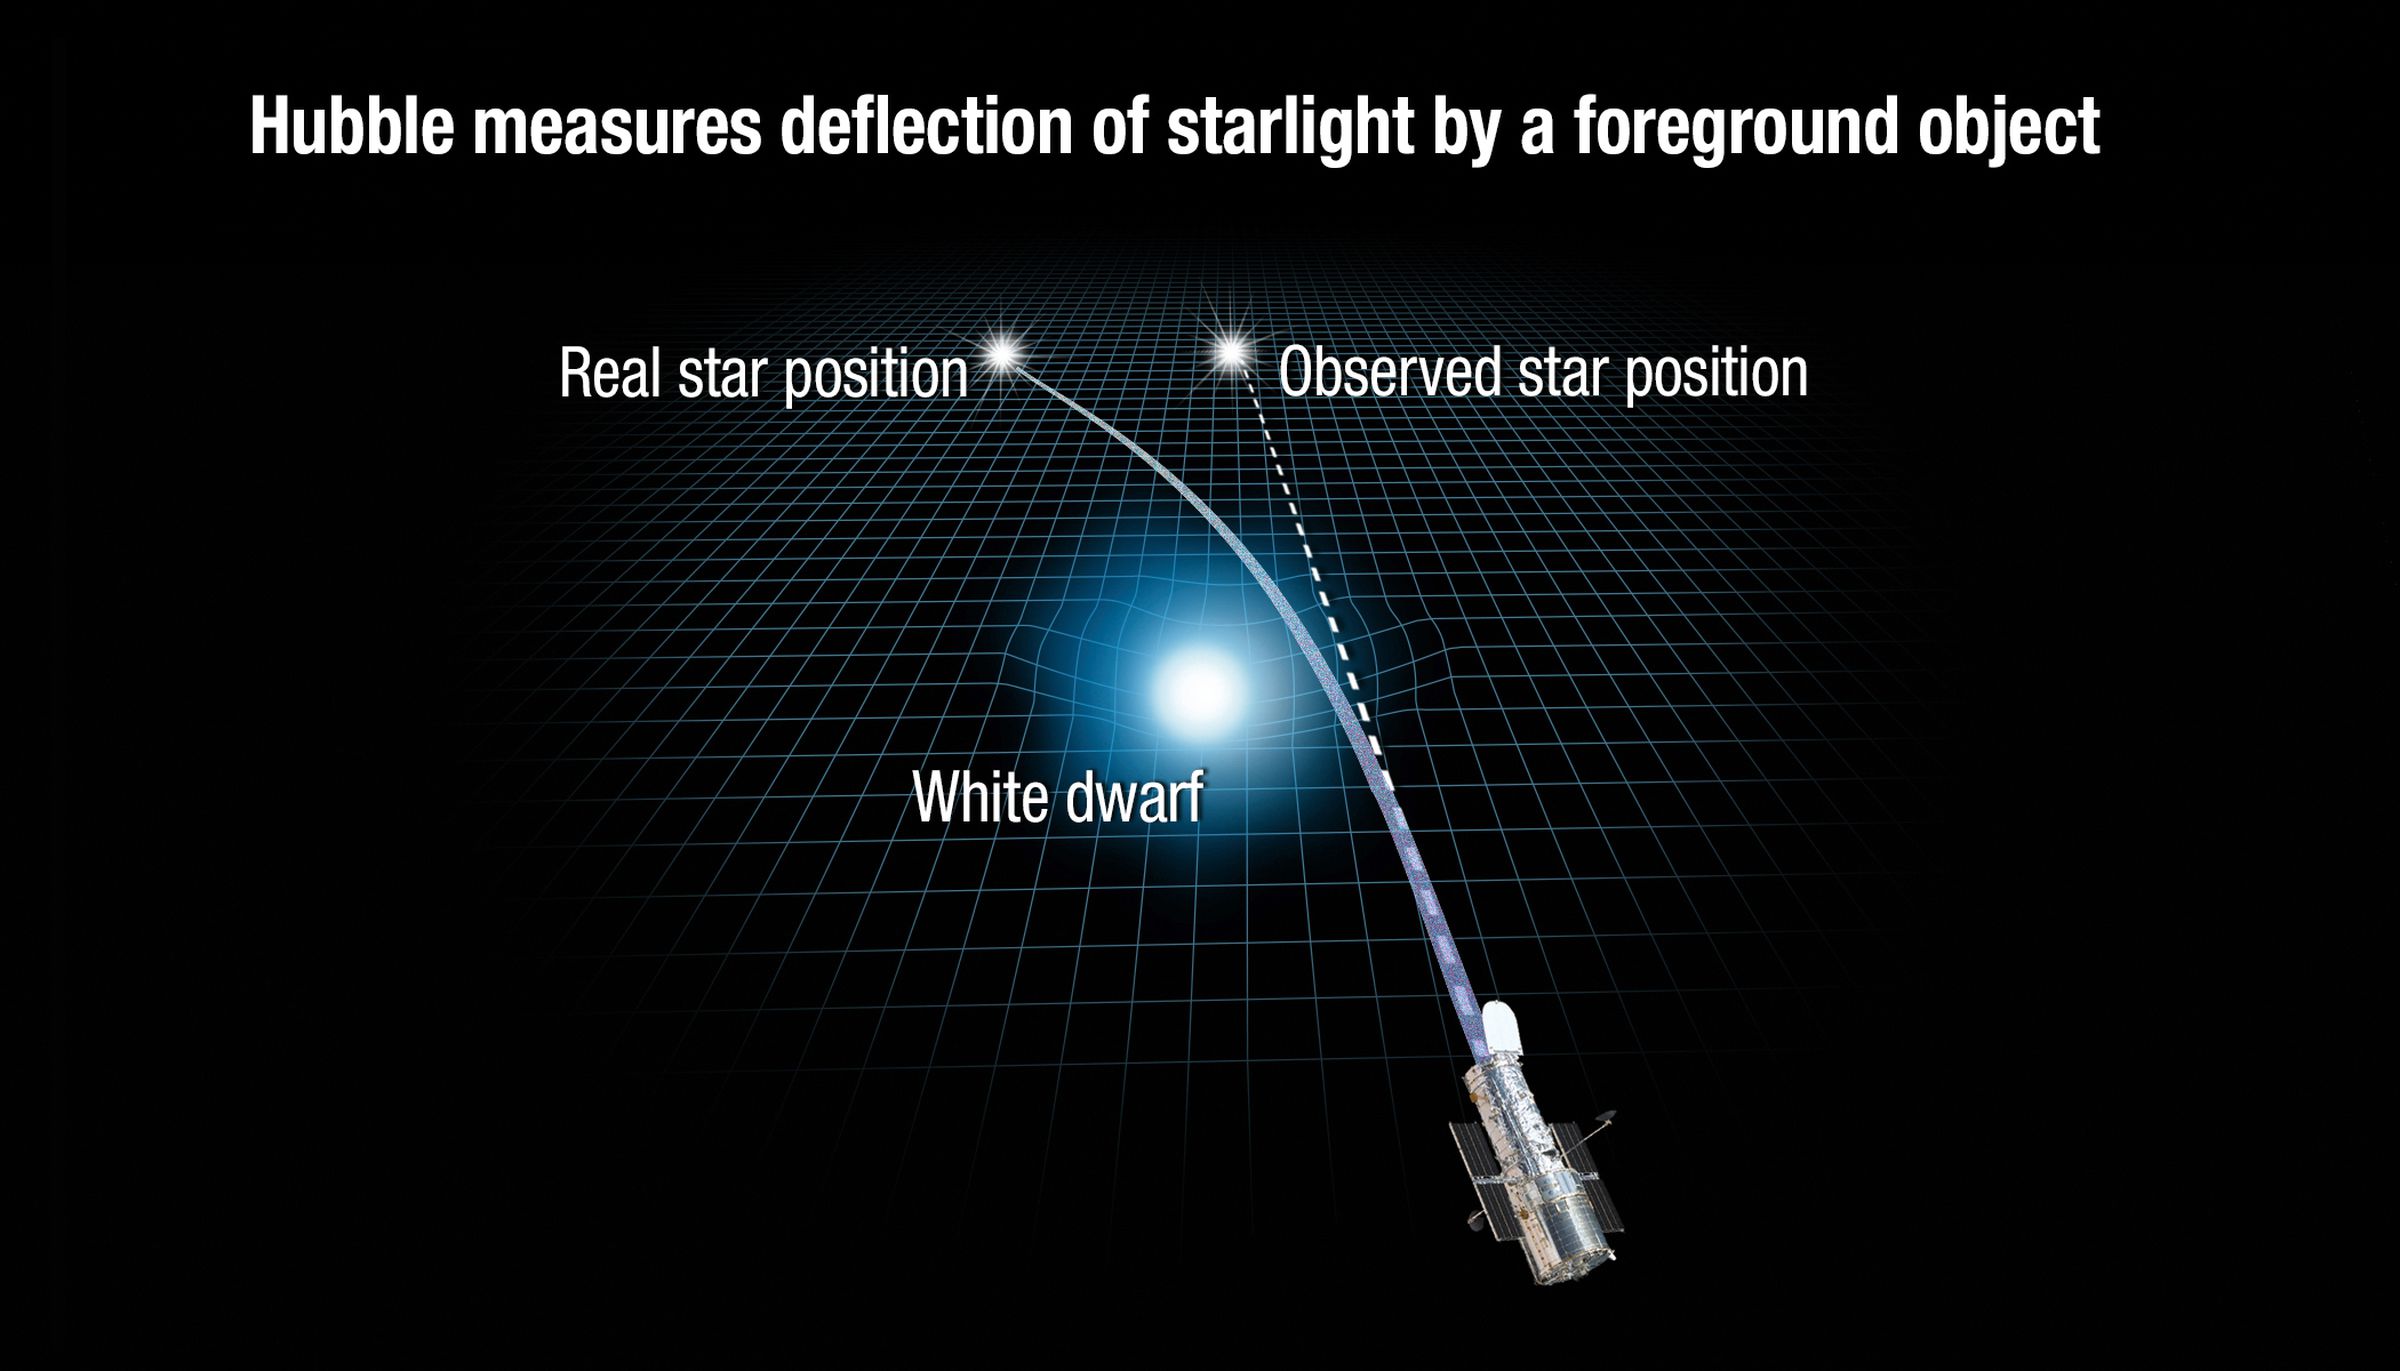 How the gravity from the white dwarf deflected the light from the background star.